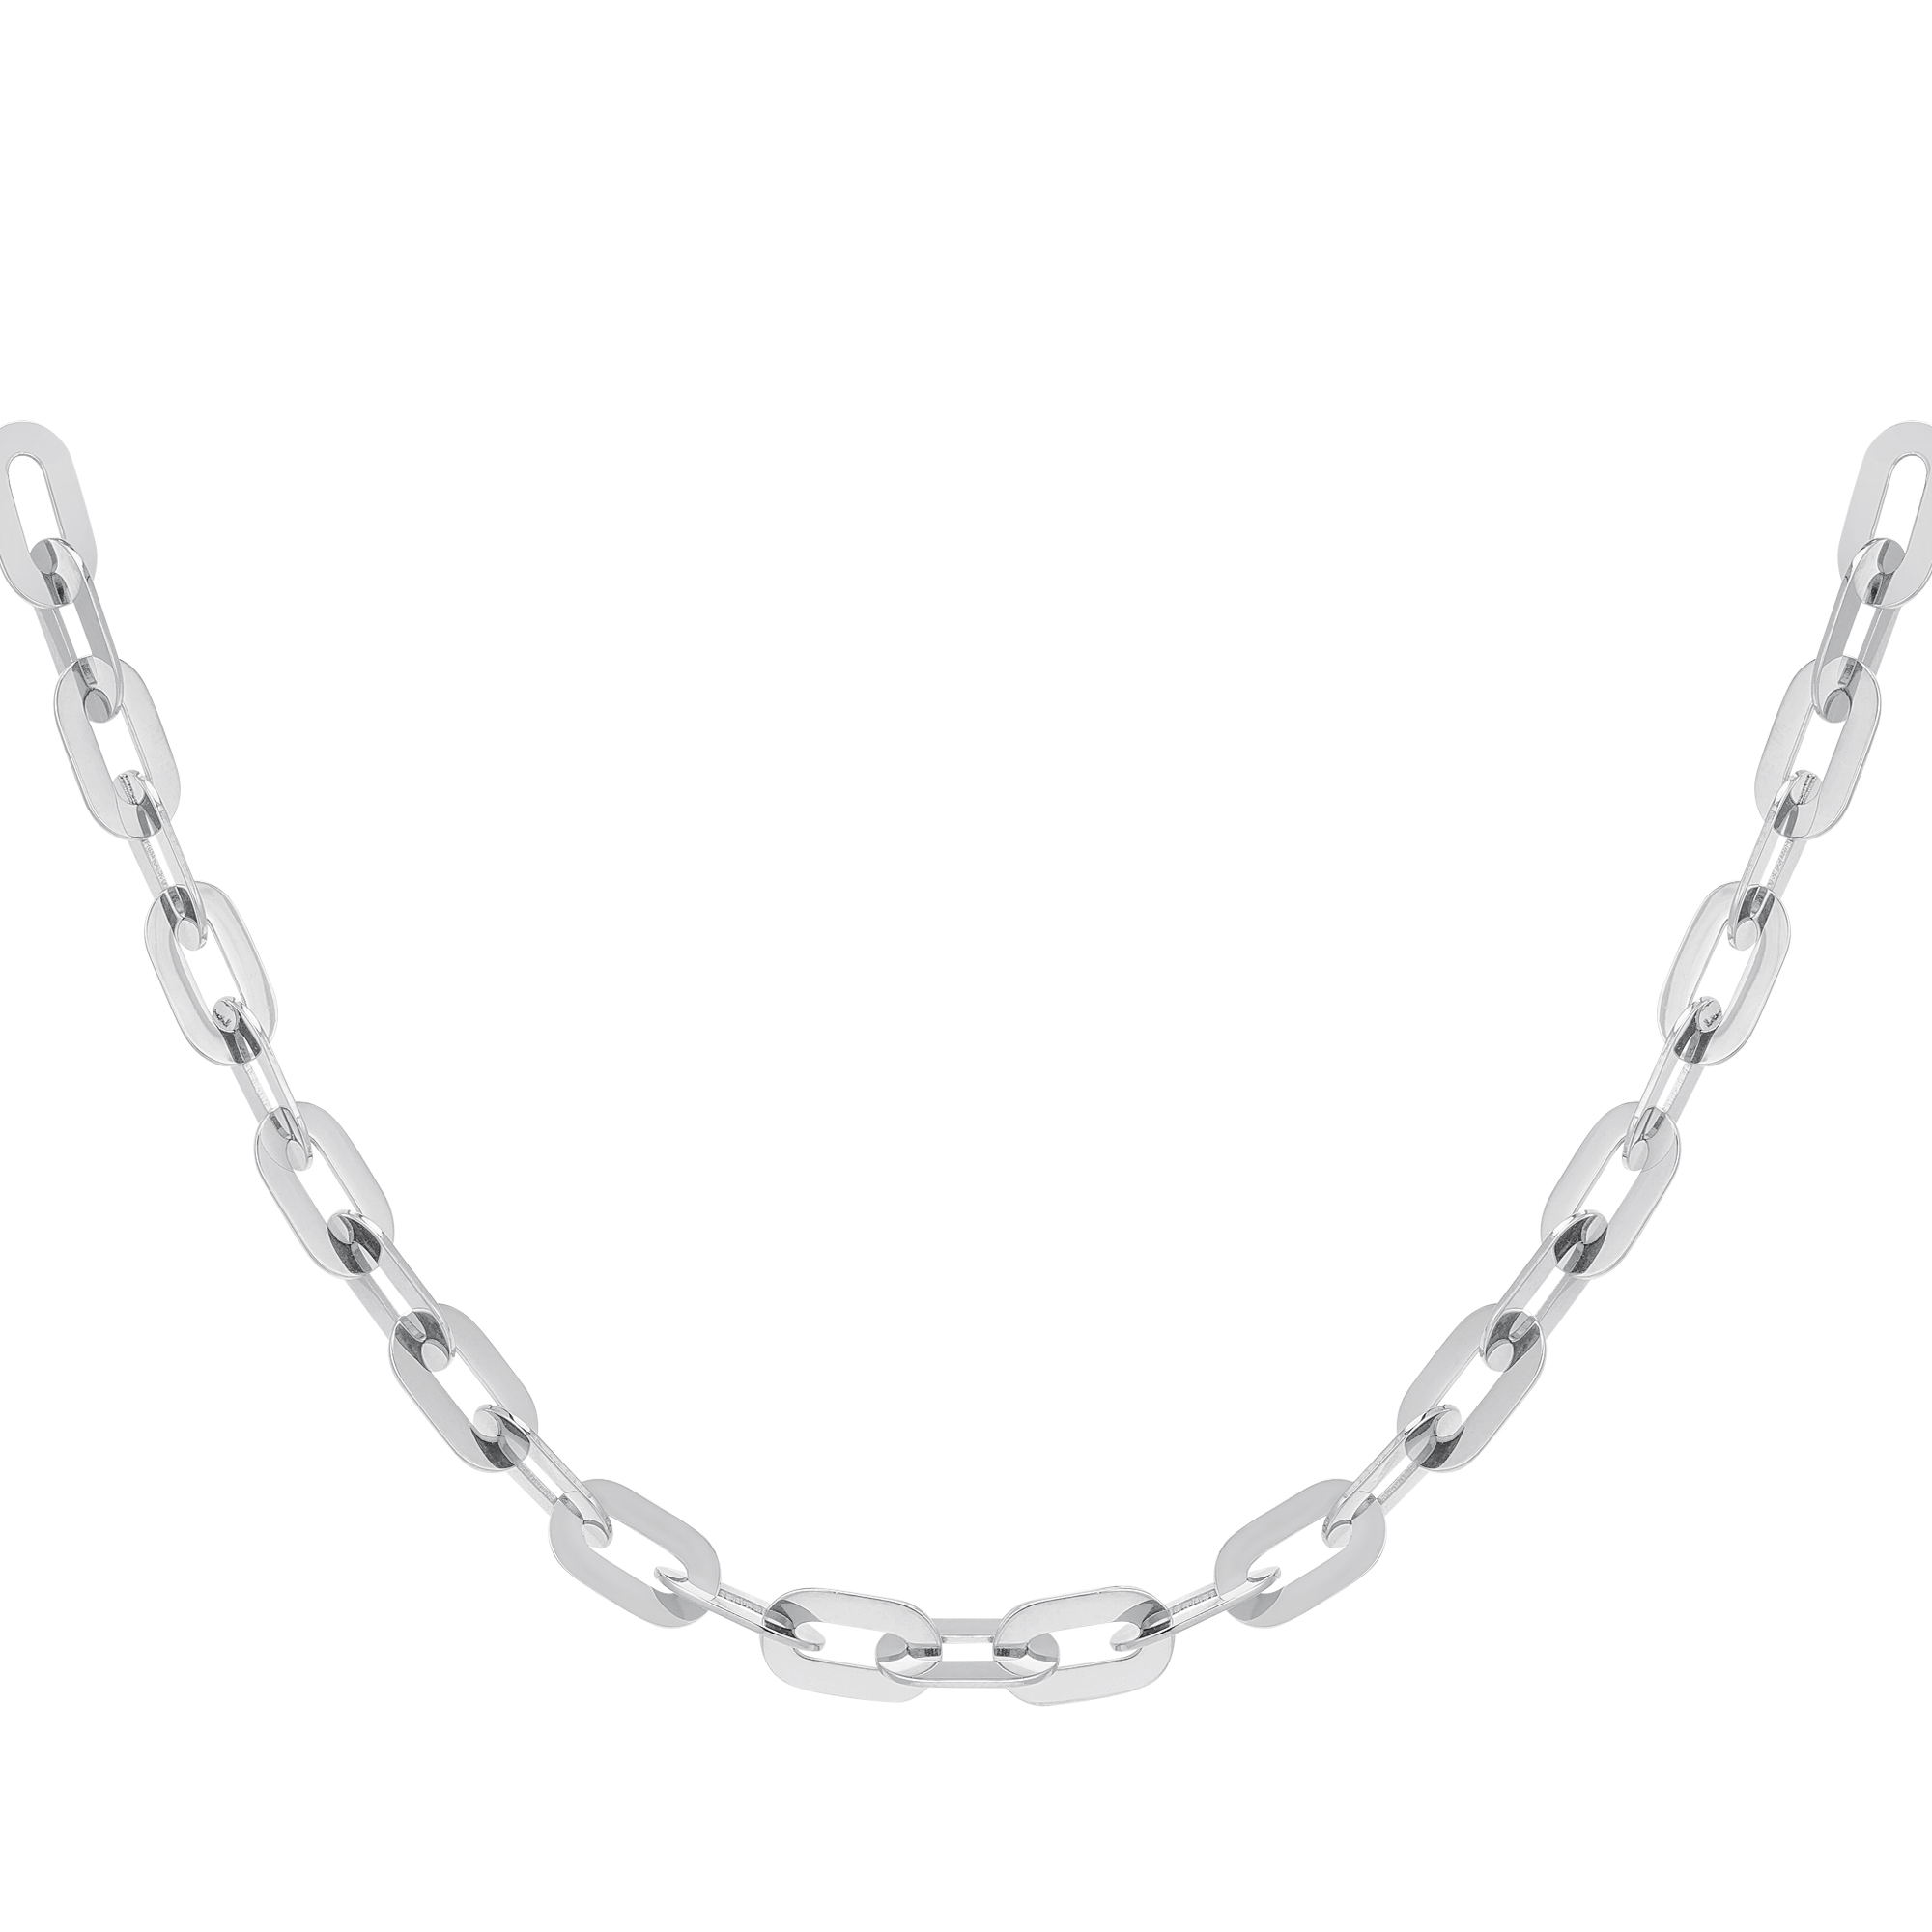 Chunky chain necklace